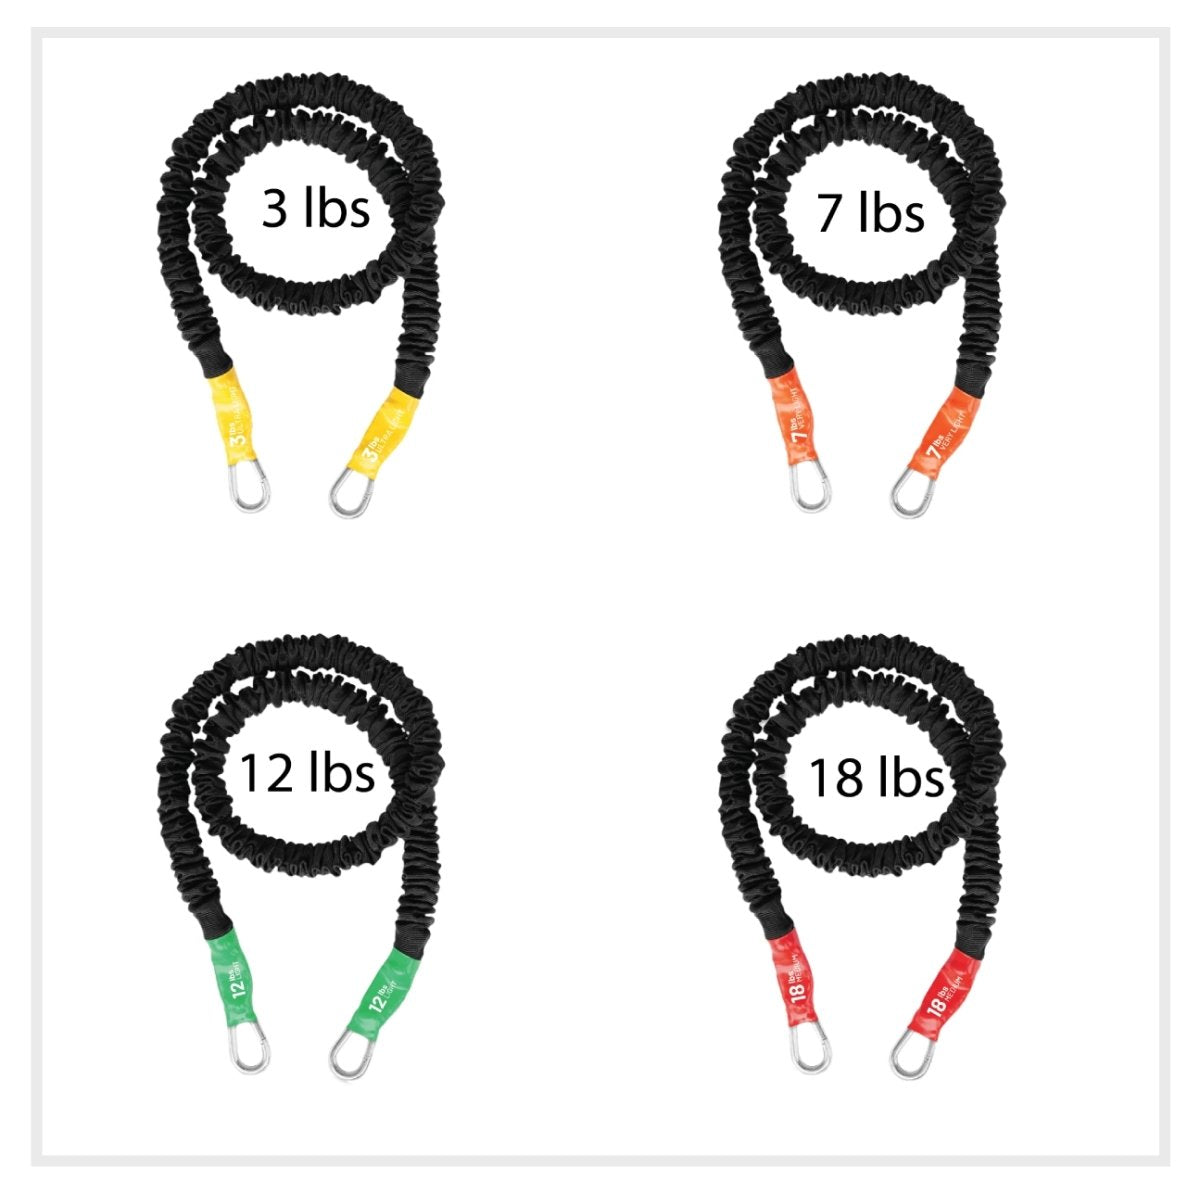 Body Sculpting Band 4-Pack (3lb/7lb/12lb/18lb) - FitCord Resistance Bands American made resistance bands that are stackable covered and versatile. Great for body building, muscle building , toning and personal trainers